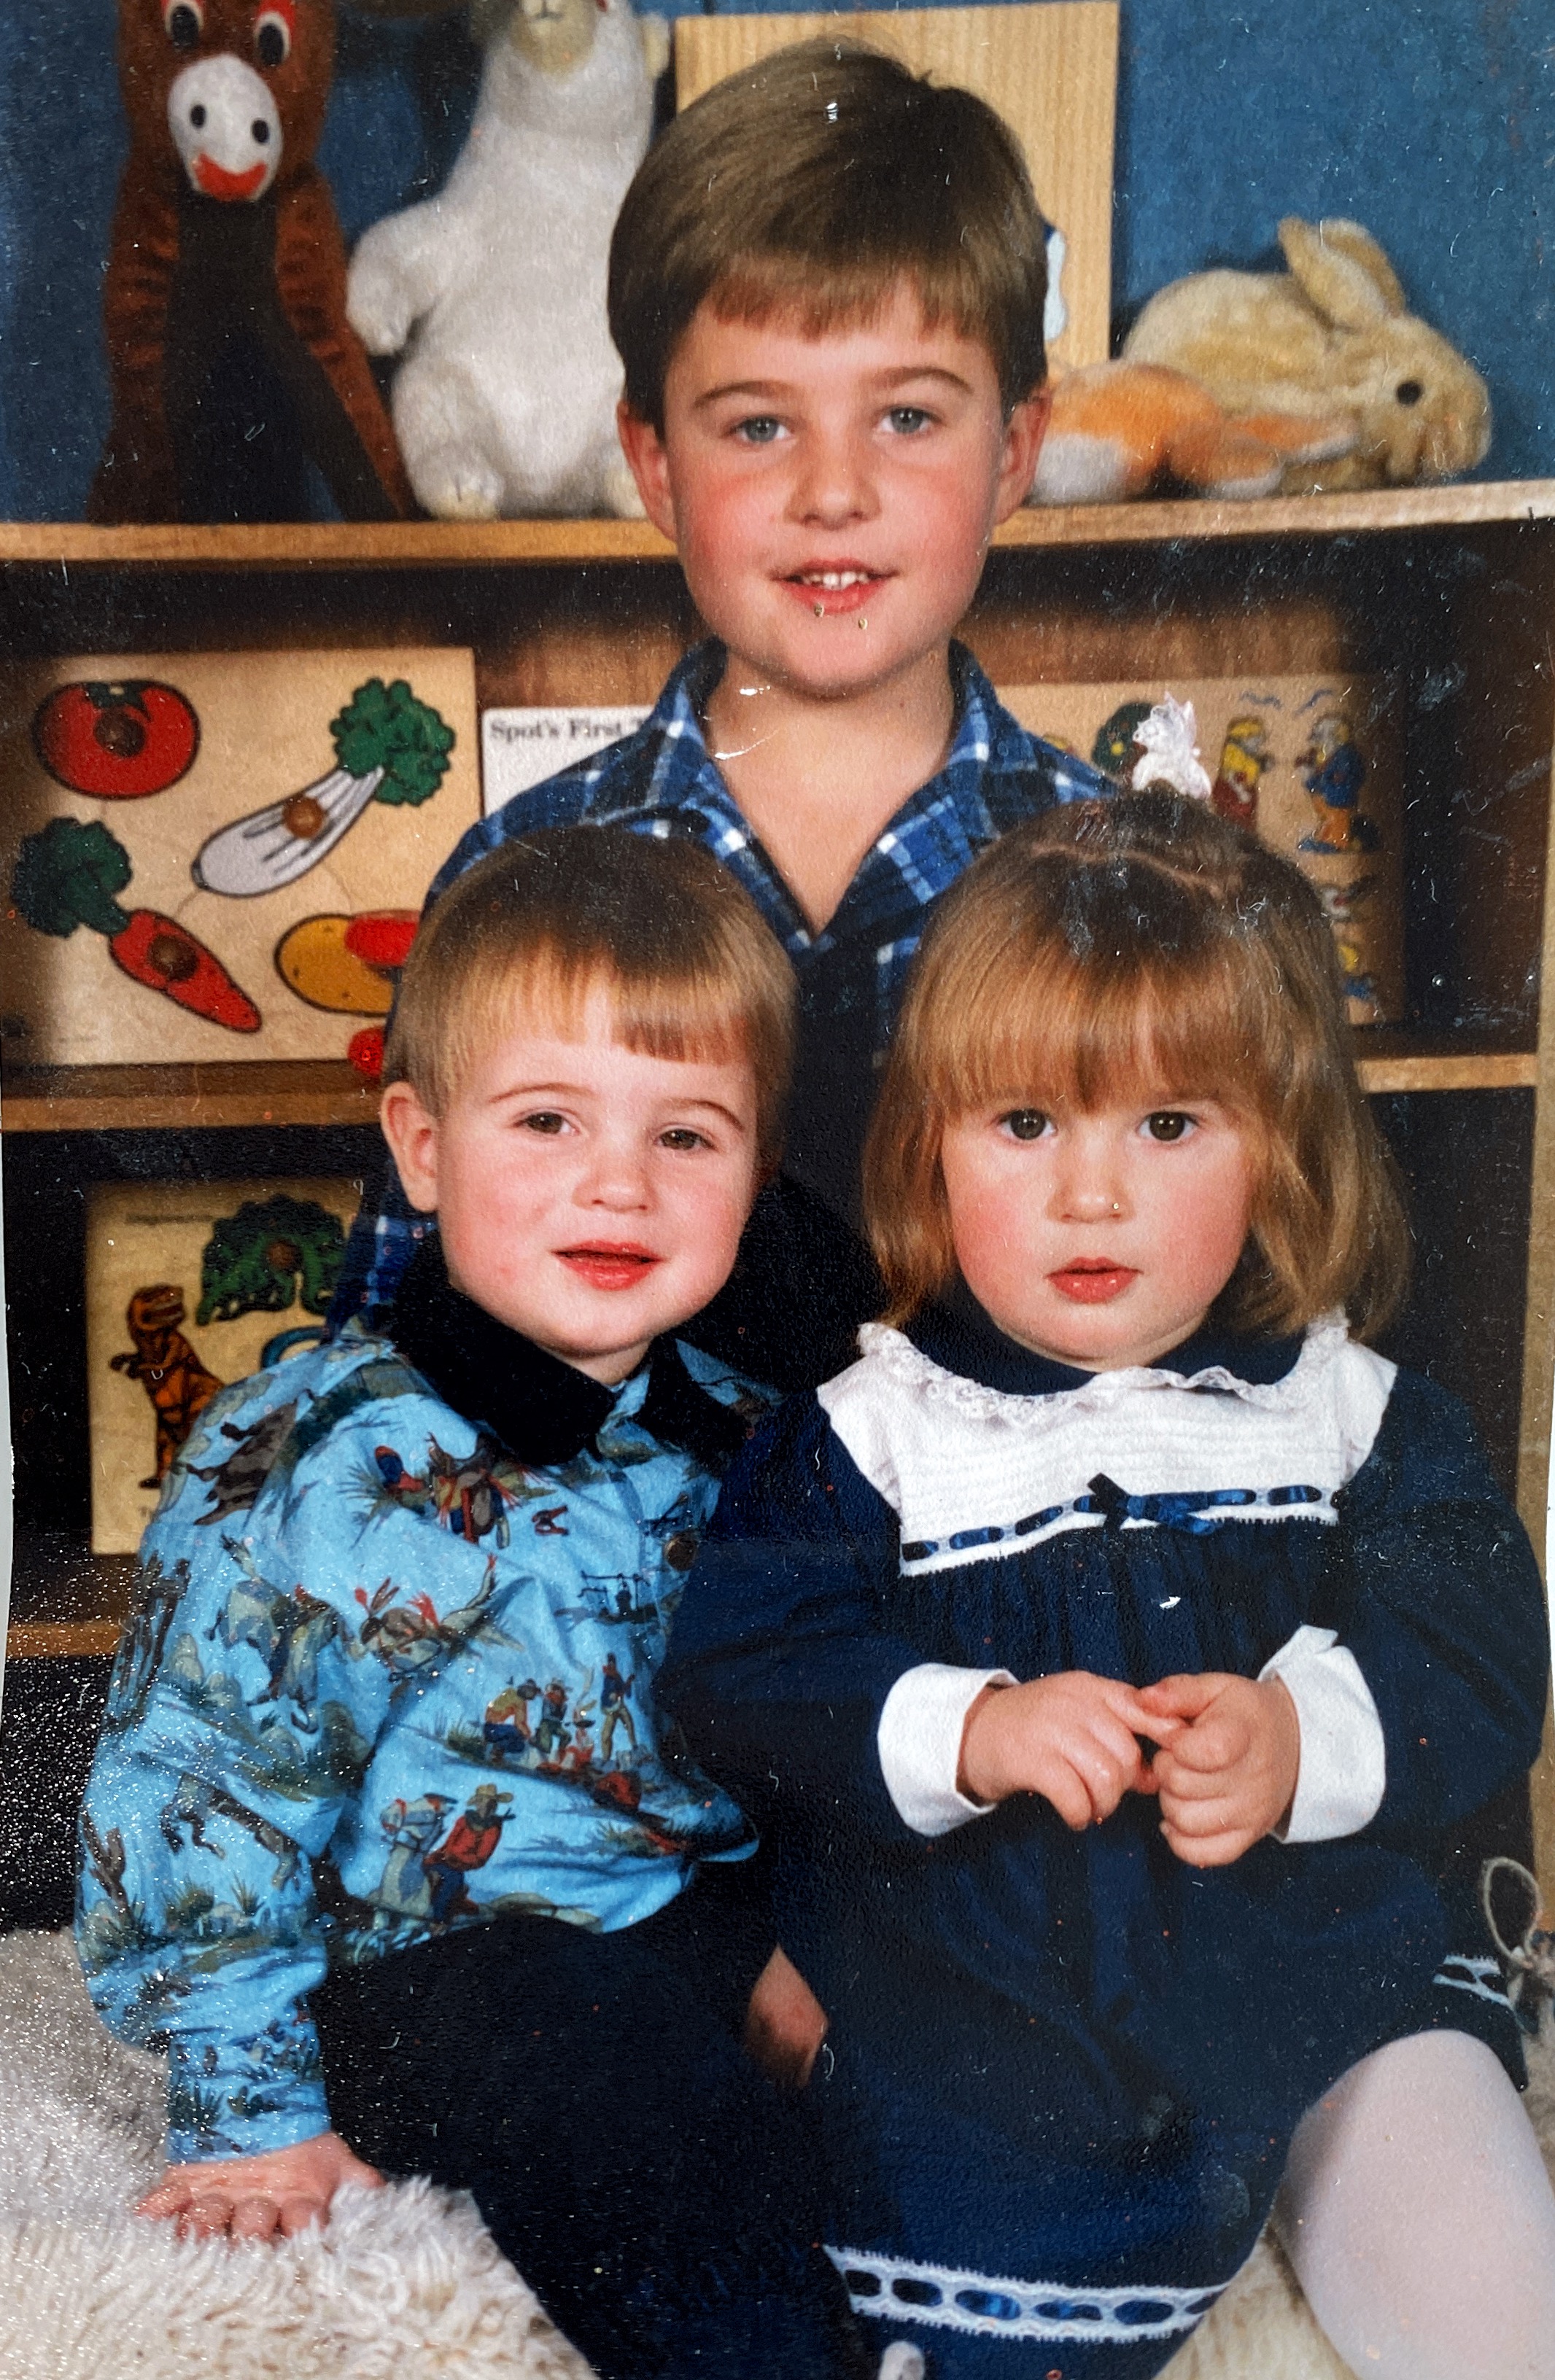 Chris Day Care photo with David and Ashley 1992